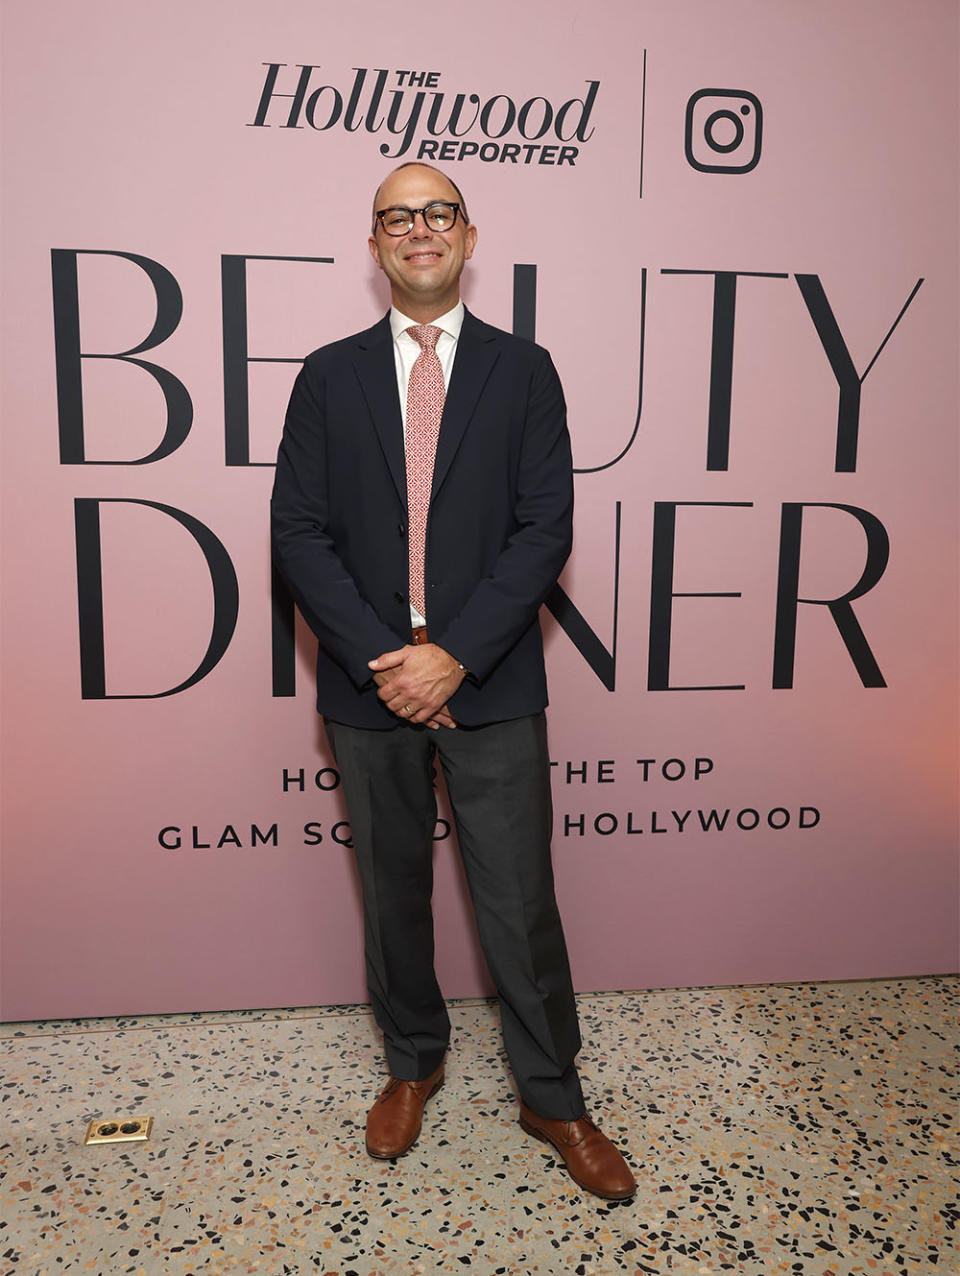 Joe Shields, President, Business Operations, The Hollywood Reporter attends The Hollywood Reporter Beauty Dinner Presented by Instagram, Sponsored by Upneeq, Honoring the Top Glam Squads in Hollywood at Holloway House on October 25, 2023 in West Hollywood, California.